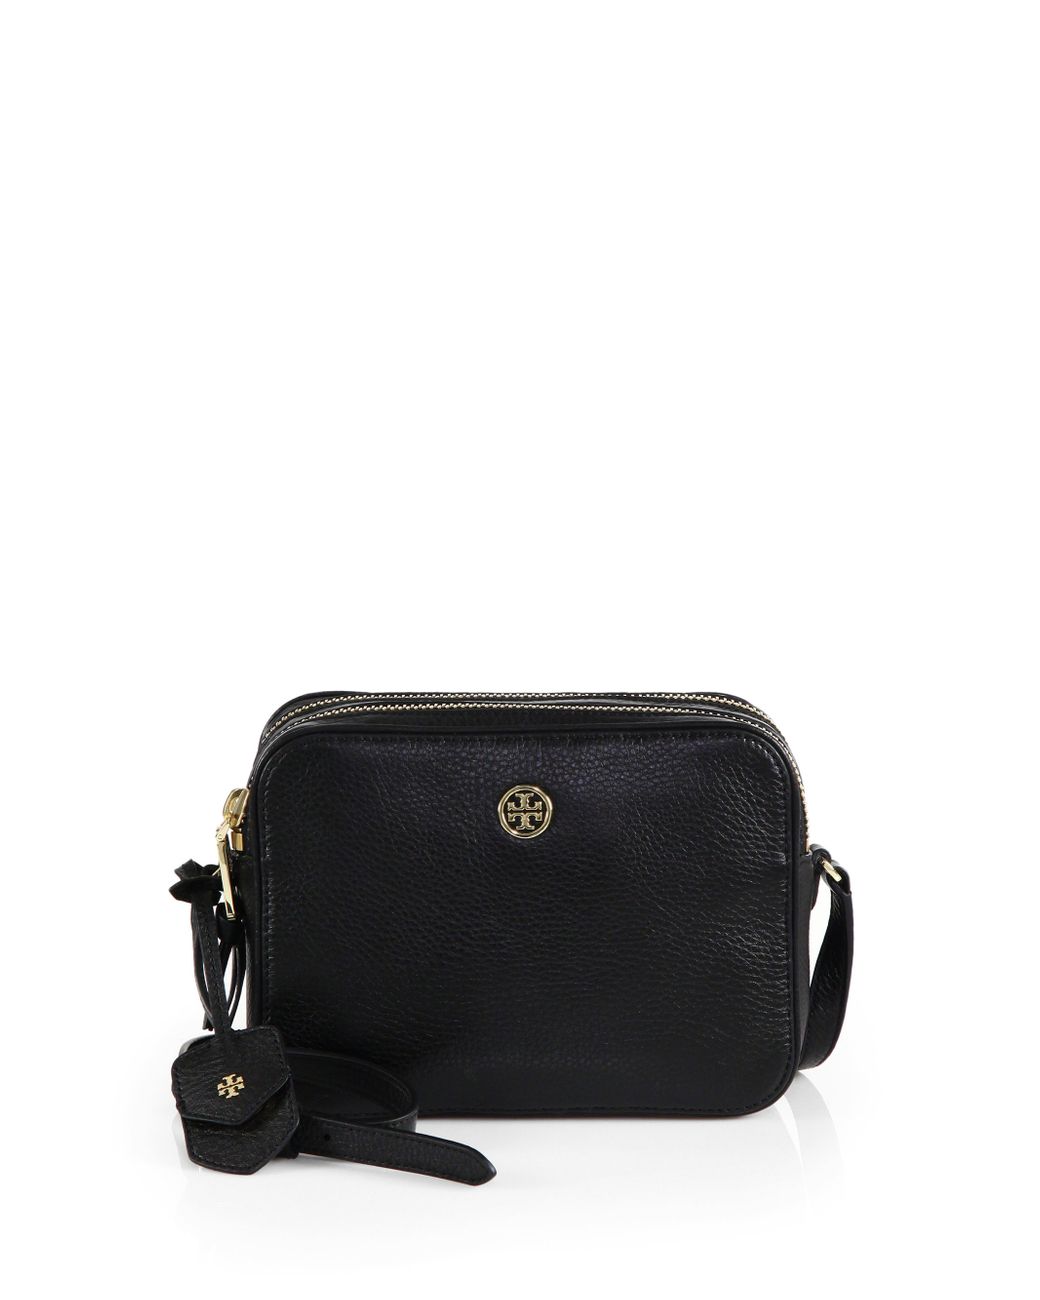 Tory Burch Brown Leather Robinson Double Zip Crossbody Bag Tory